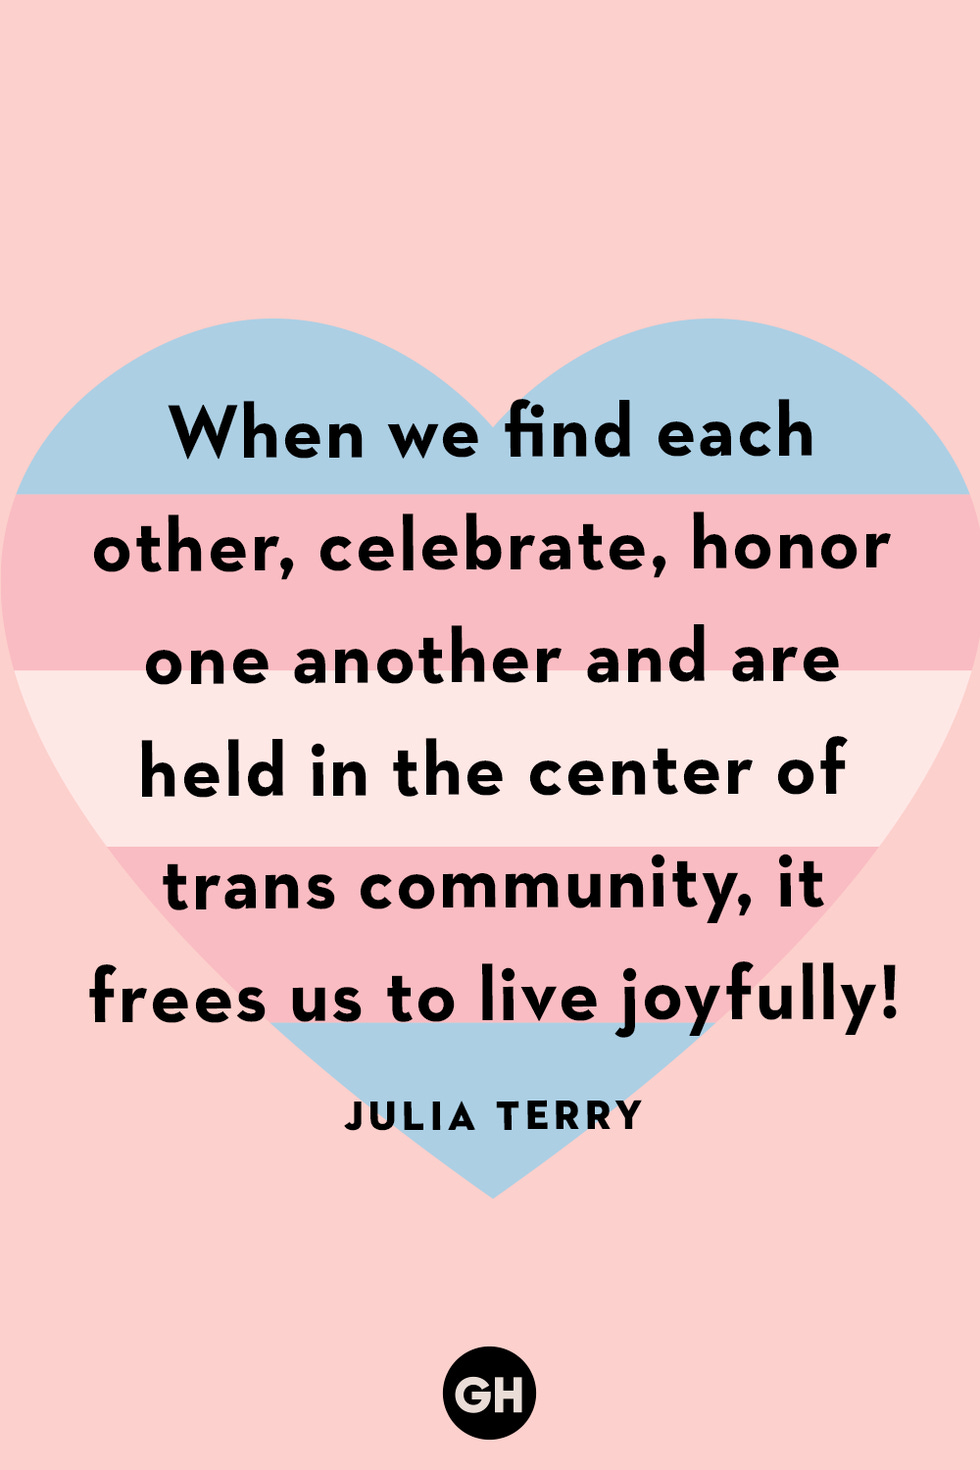 black words over a trans flag heart that read: when we find each other, celebrate, honor, one another and are held in the center of trans community, it frees us to live joyfully!